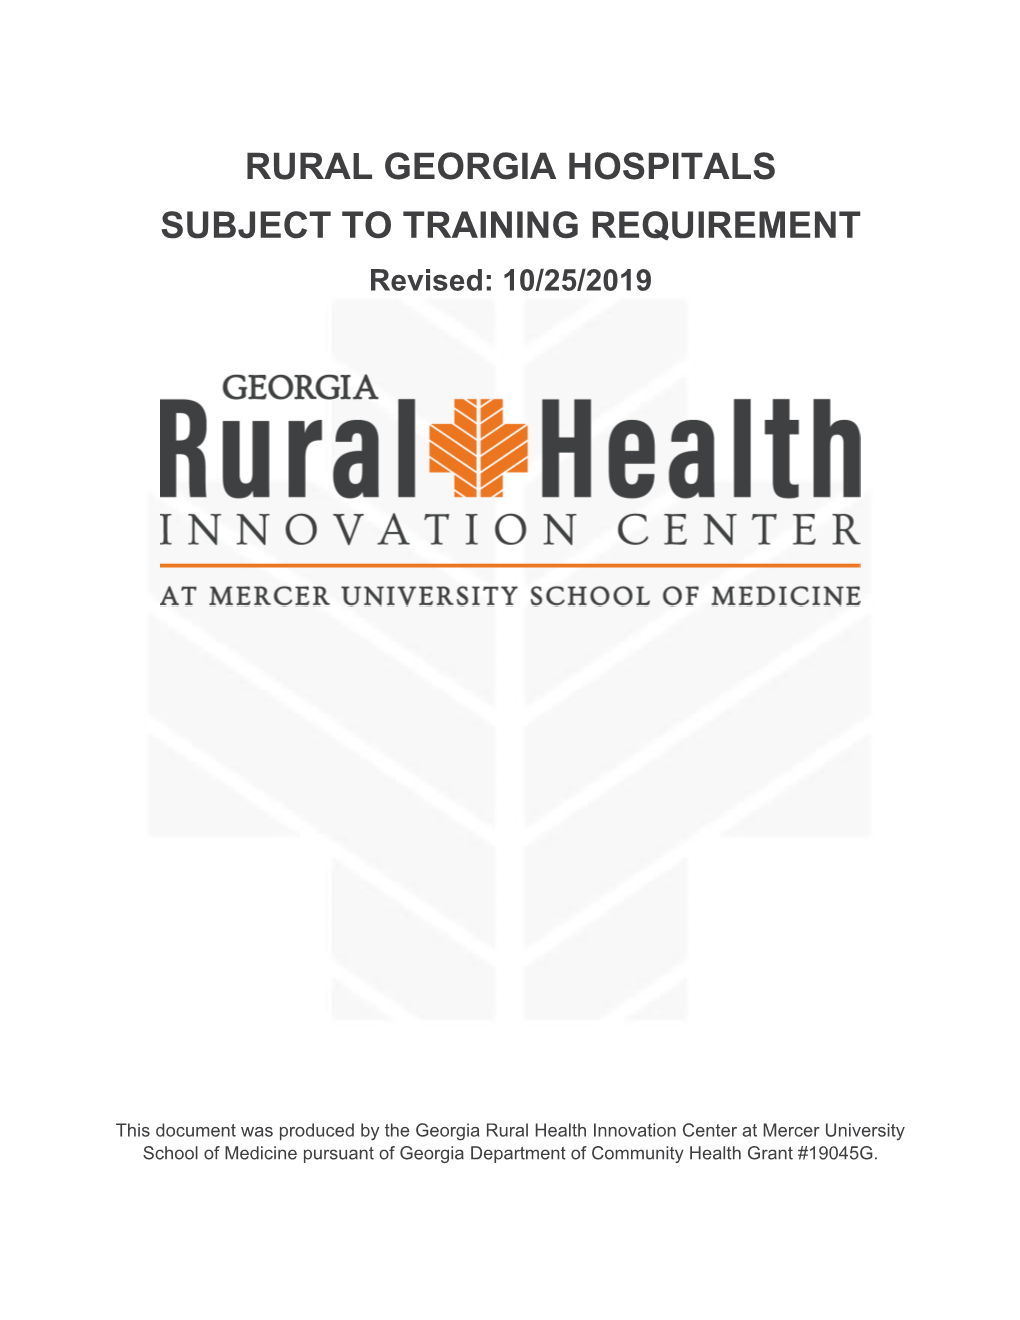 RURAL GEORGIA HOSPITALS SUBJECT to TRAINING REQUIREMENT Revised: 10/25/2019